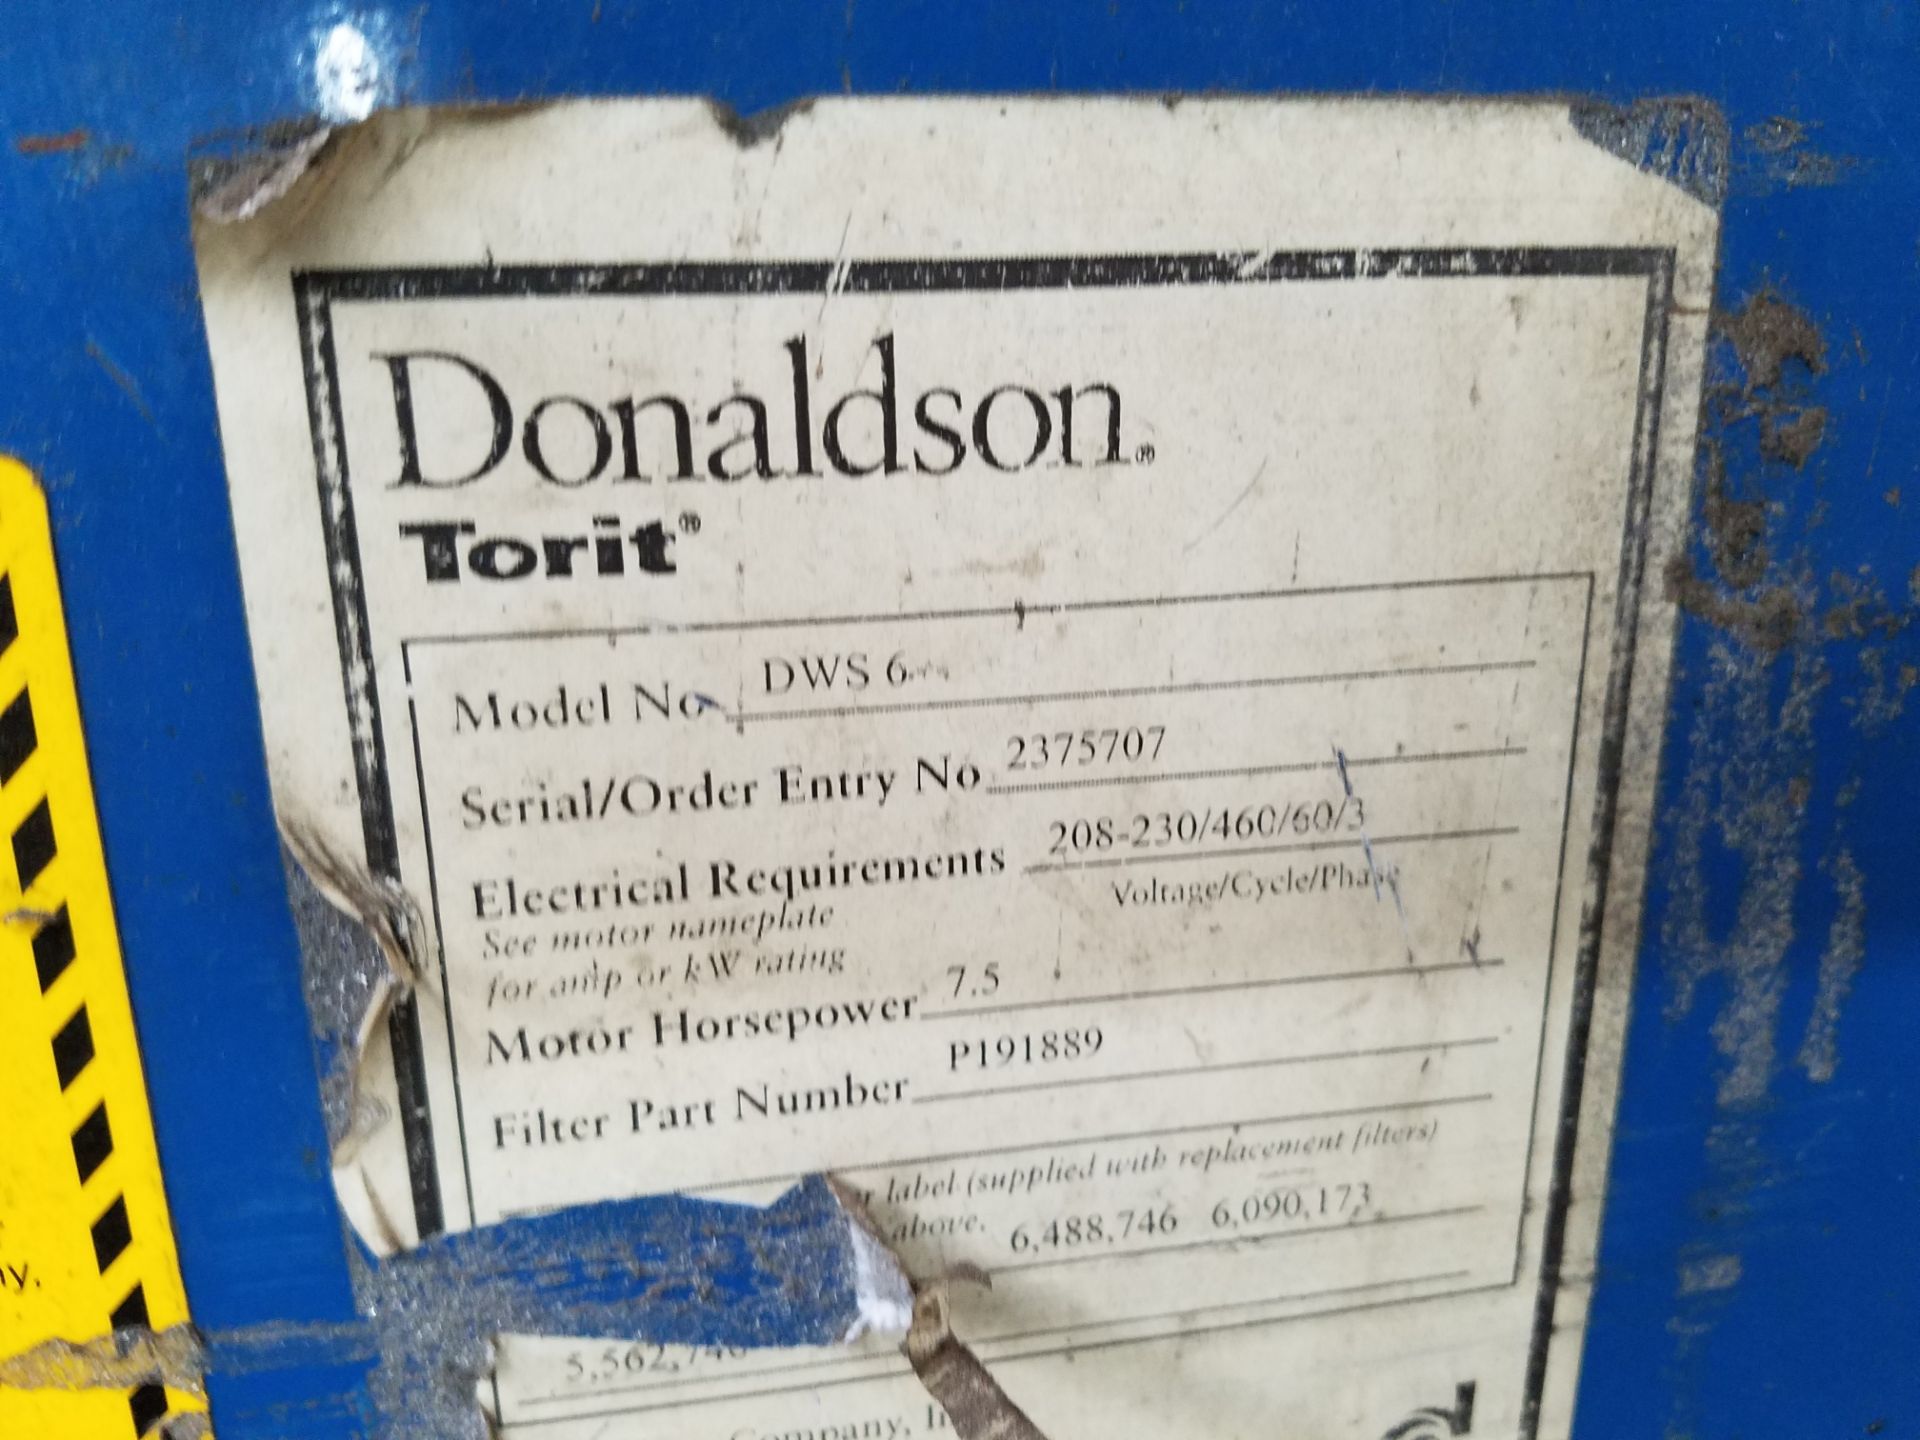 DONALDSON TORIT DWS 6 DUST COLLECTOR SN 2375707, 208-230/460/60/3, 7.5HP - Image 2 of 2